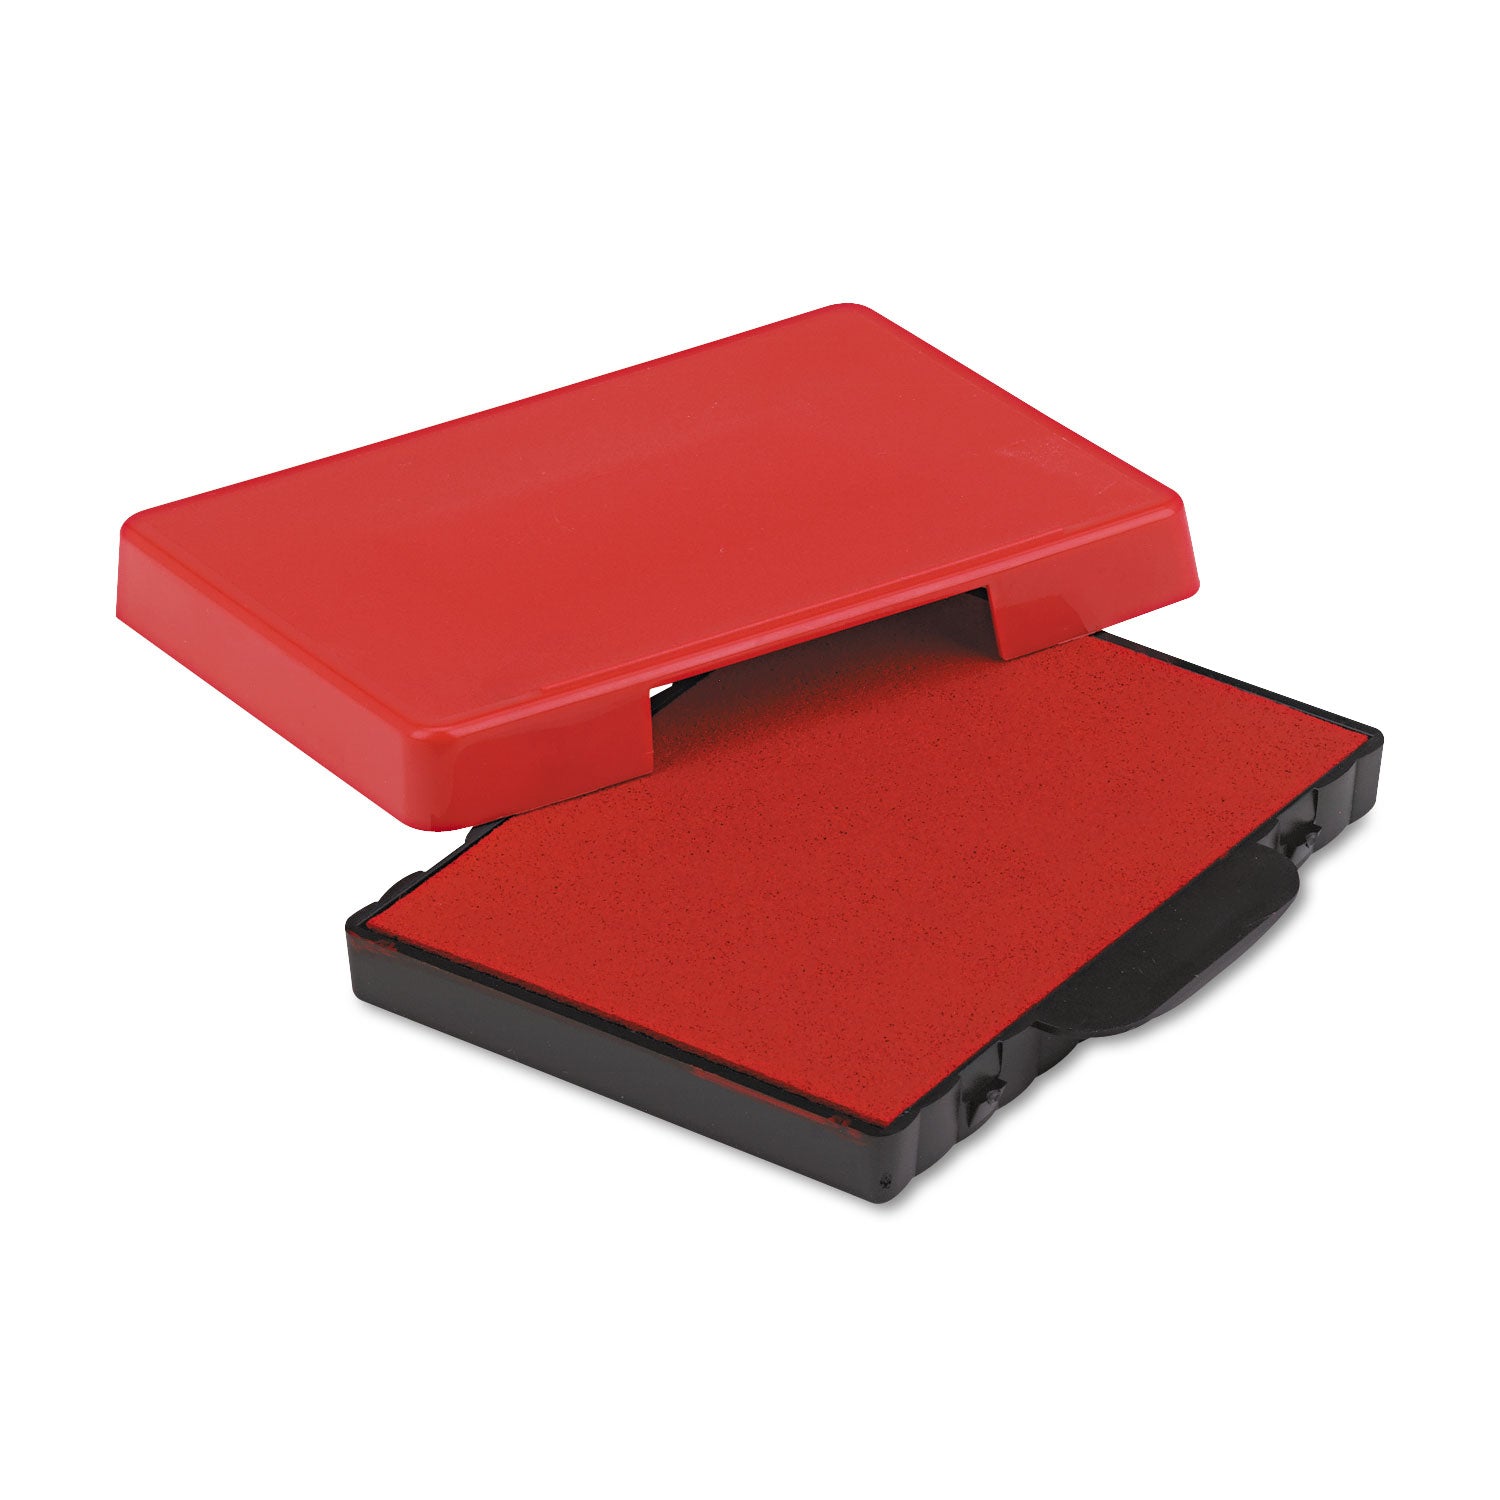 T5460 Professional Replacement Ink Pad for Trodat Custom Self-Inking Stamps, 1.38" x 2.38", Red - 